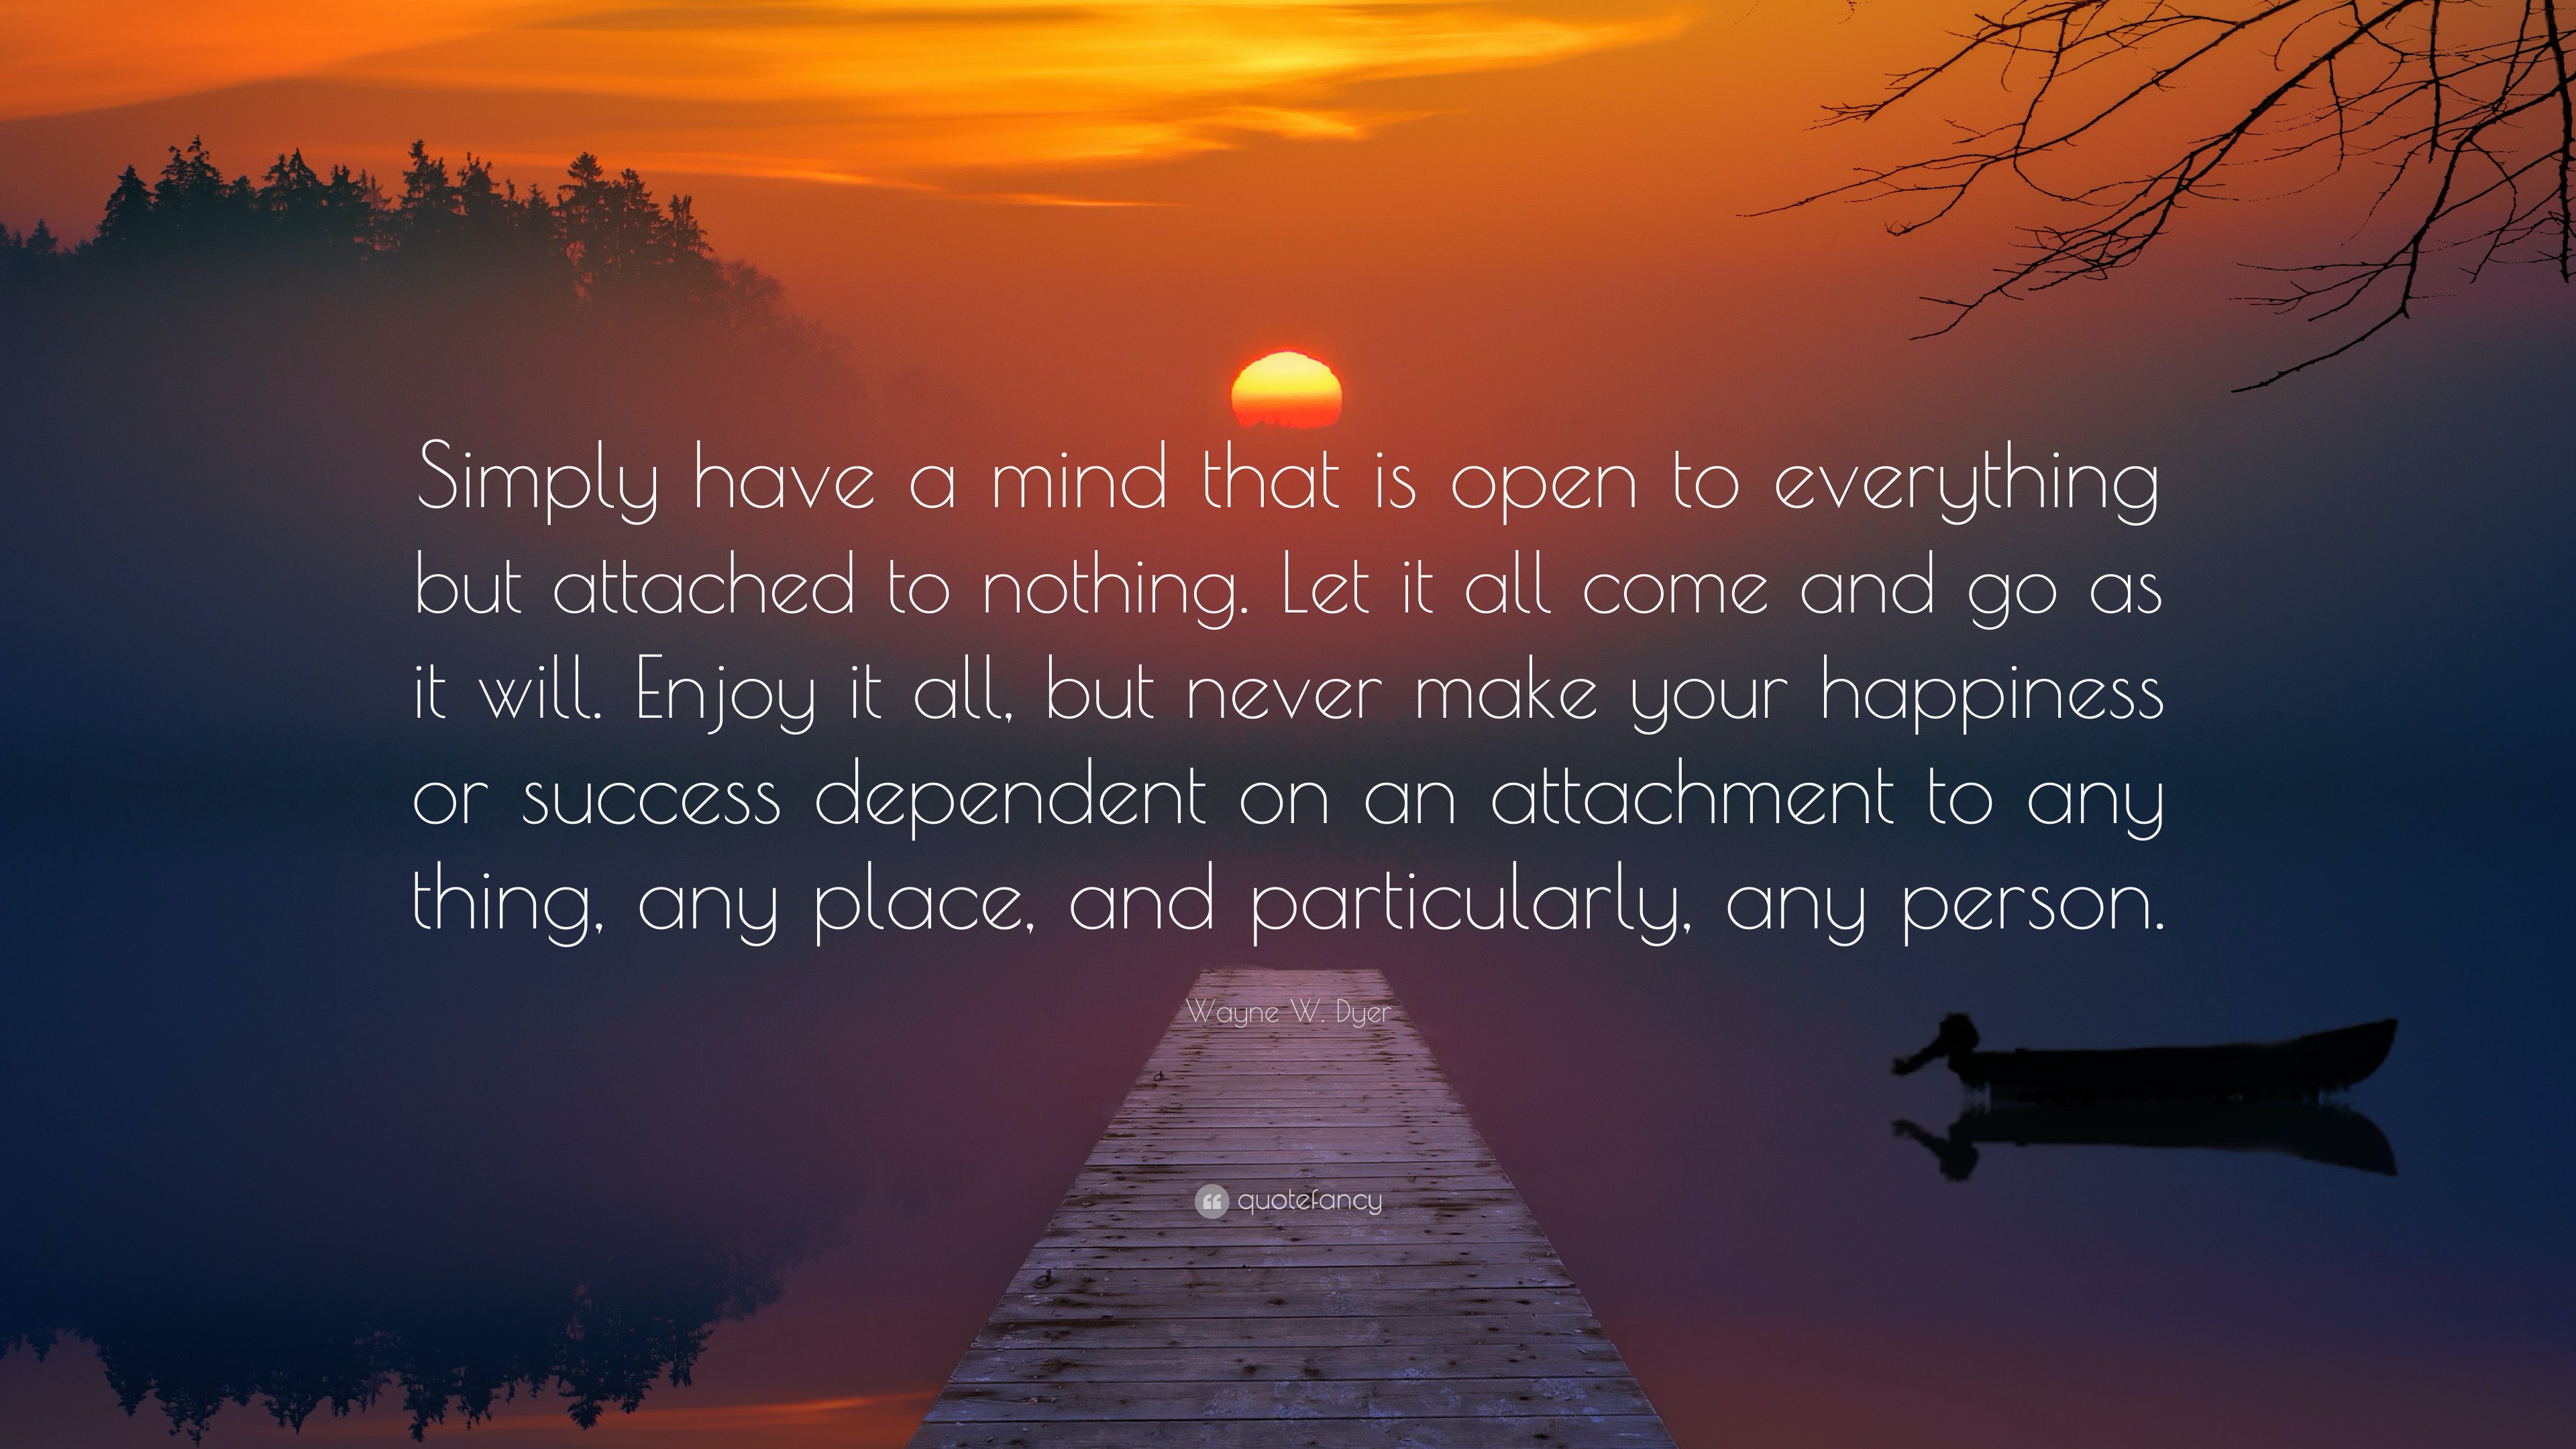 Wayne W. Dyer Quote: “Simply have a mind that is open to everything but ...